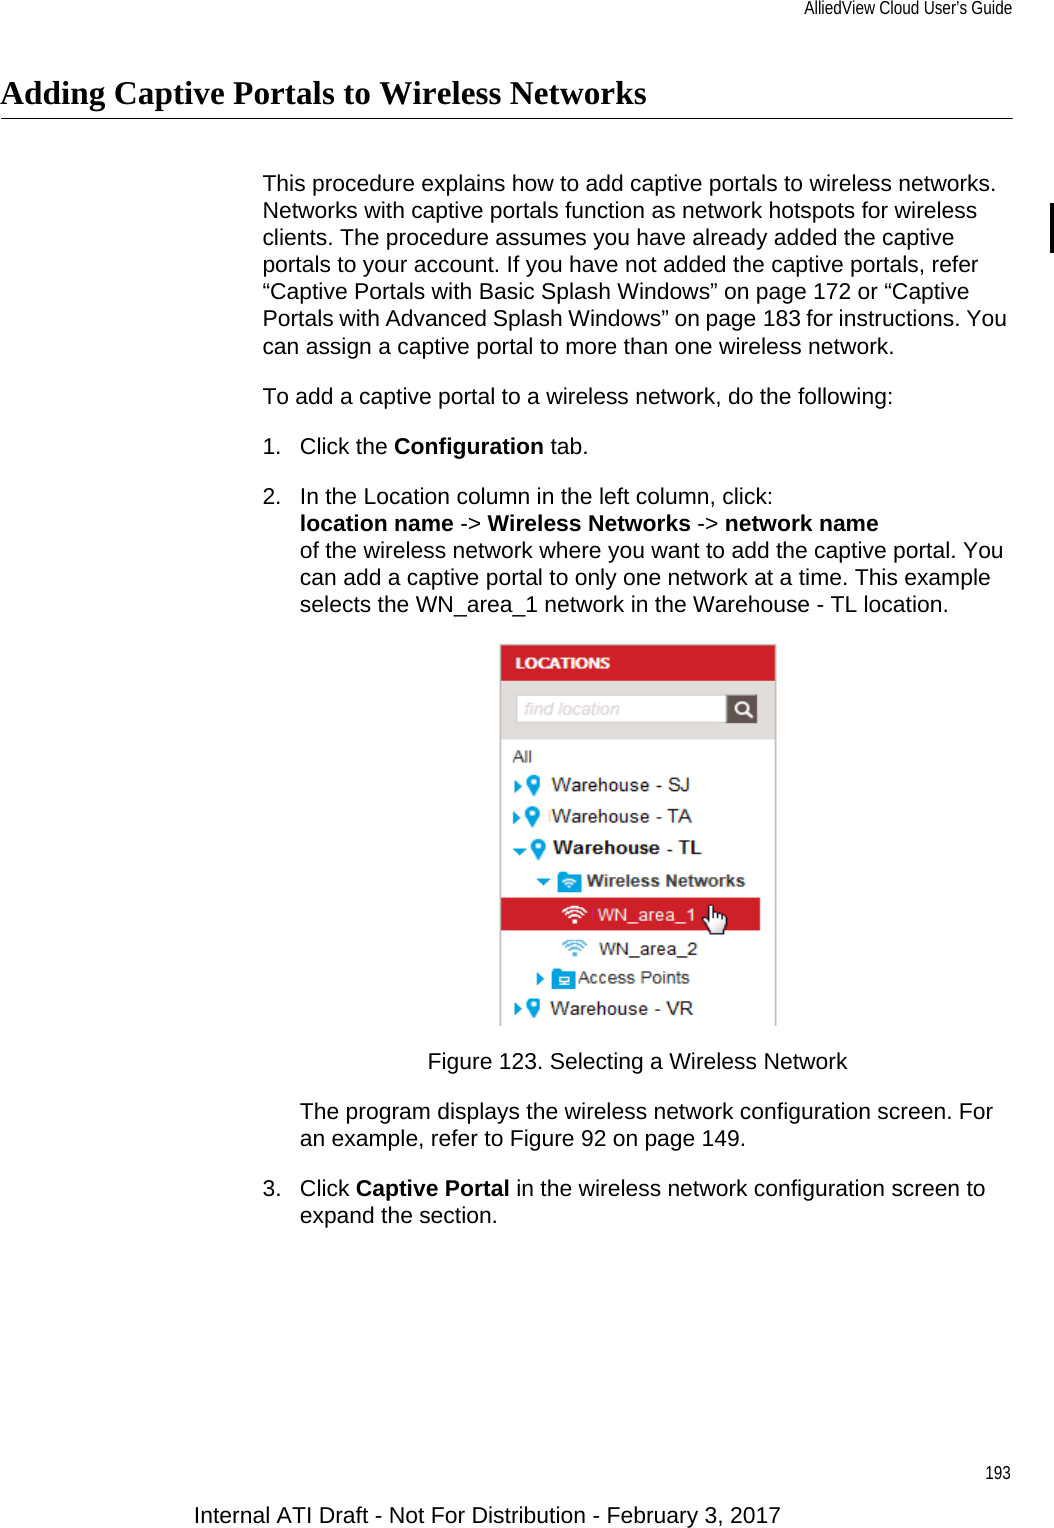 AlliedView Cloud User’s Guide193Adding Captive Portals to Wireless NetworksThis procedure explains how to add captive portals to wireless networks. Networks with captive portals function as network hotspots for wireless clients. The procedure assumes you have already added the captive portals to your account. If you have not added the captive portals, refer “Captive Portals with Basic Splash Windows” on page 172 or “Captive Portals with Advanced Splash Windows” on page 183 for instructions. You can assign a captive portal to more than one wireless network.To add a captive portal to a wireless network, do the following:1. Click the Configuration tab.2. In the Location column in the left column, click:location name -&gt; Wireless Networks -&gt; network nameof the wireless network where you want to add the captive portal. You can add a captive portal to only one network at a time. This example selects the WN_area_1 network in the Warehouse - TL location.Figure 123. Selecting a Wireless NetworkThe program displays the wireless network configuration screen. For an example, refer to Figure 92 on page 149.3. Click Captive Portal in the wireless network configuration screen to expand the section.Internal ATI Draft - Not For Distribution - February 3, 2017